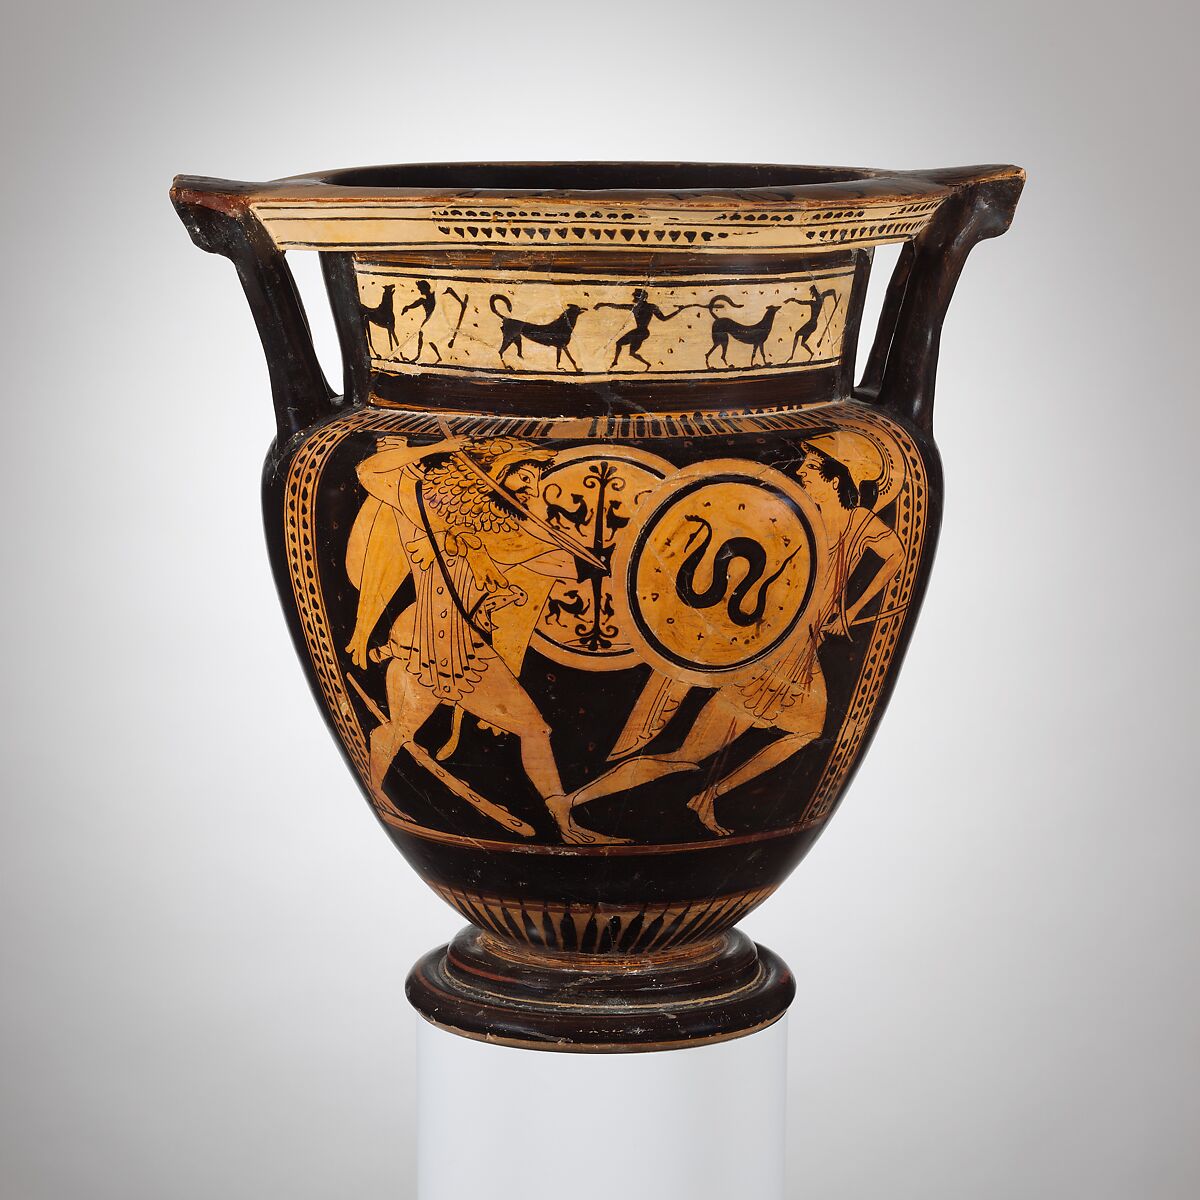 Terracotta column-krater (bowl for mixing wine and water), Attributed to the manner of the Göttingen Painter, Terracotta, Greek, Attic 